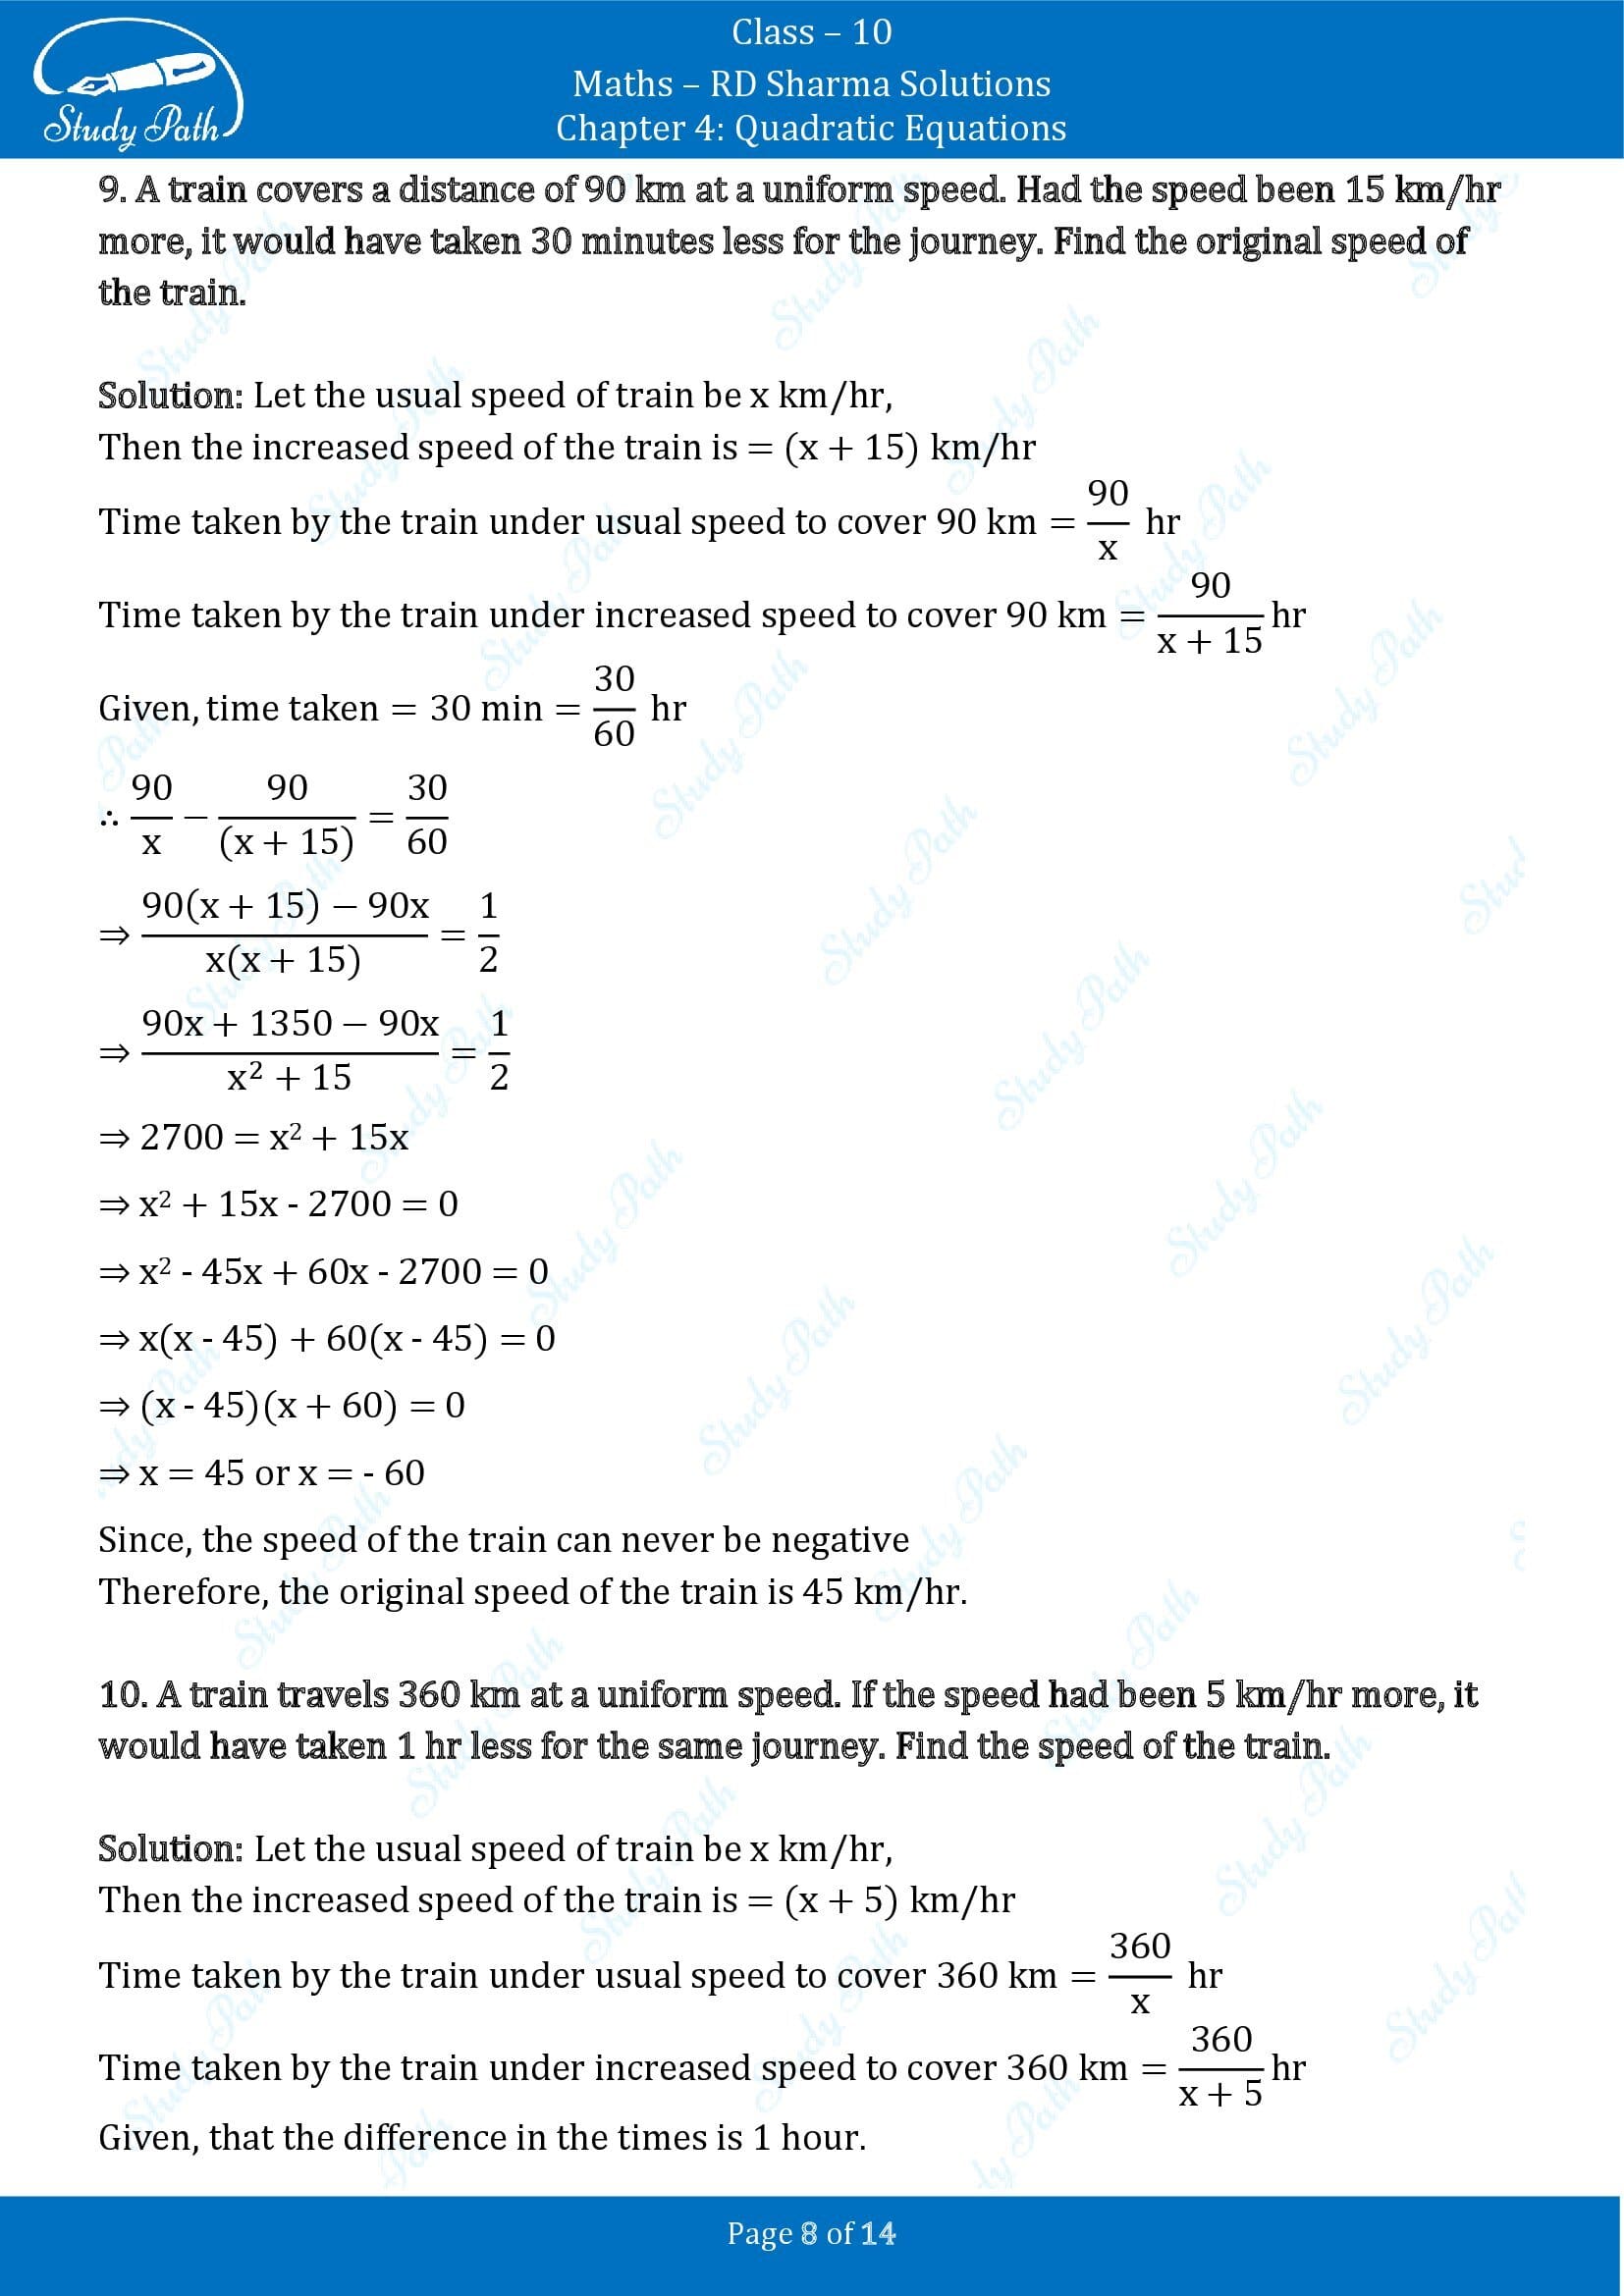 RD Sharma Solutions Class 10 Chapter 4 Quadratic Equations Exercise 4.8 00008